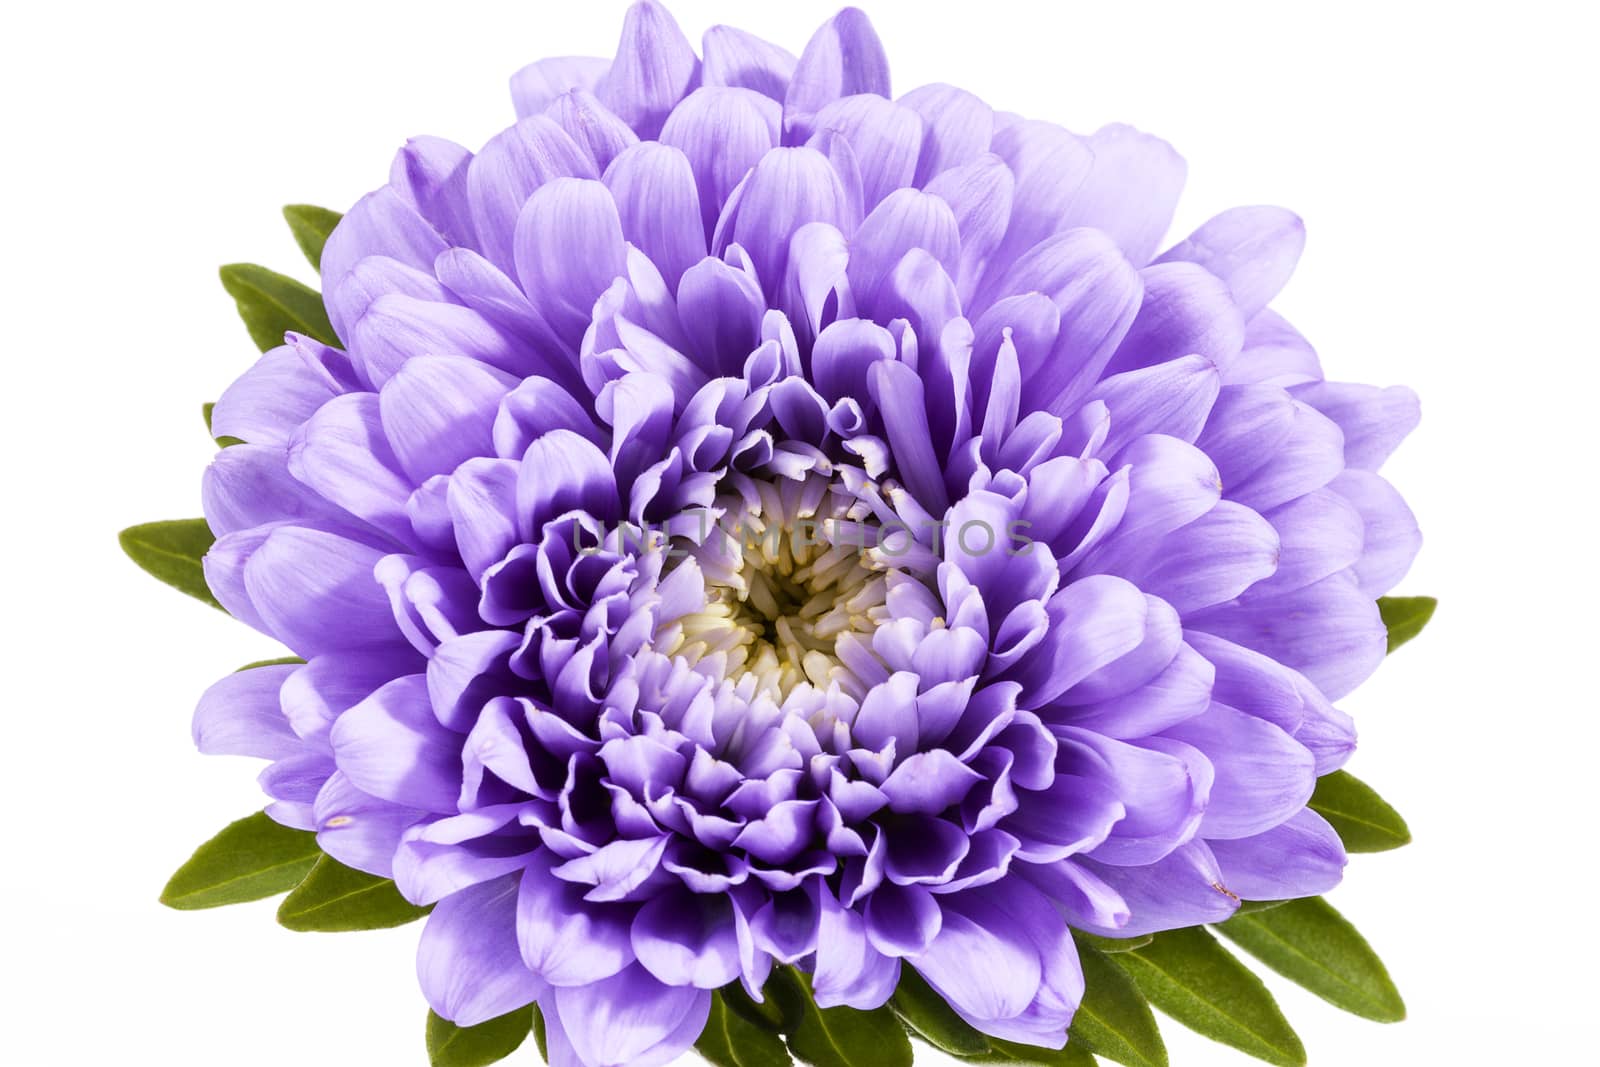 Single violet flower of aster isolated on white background, close up